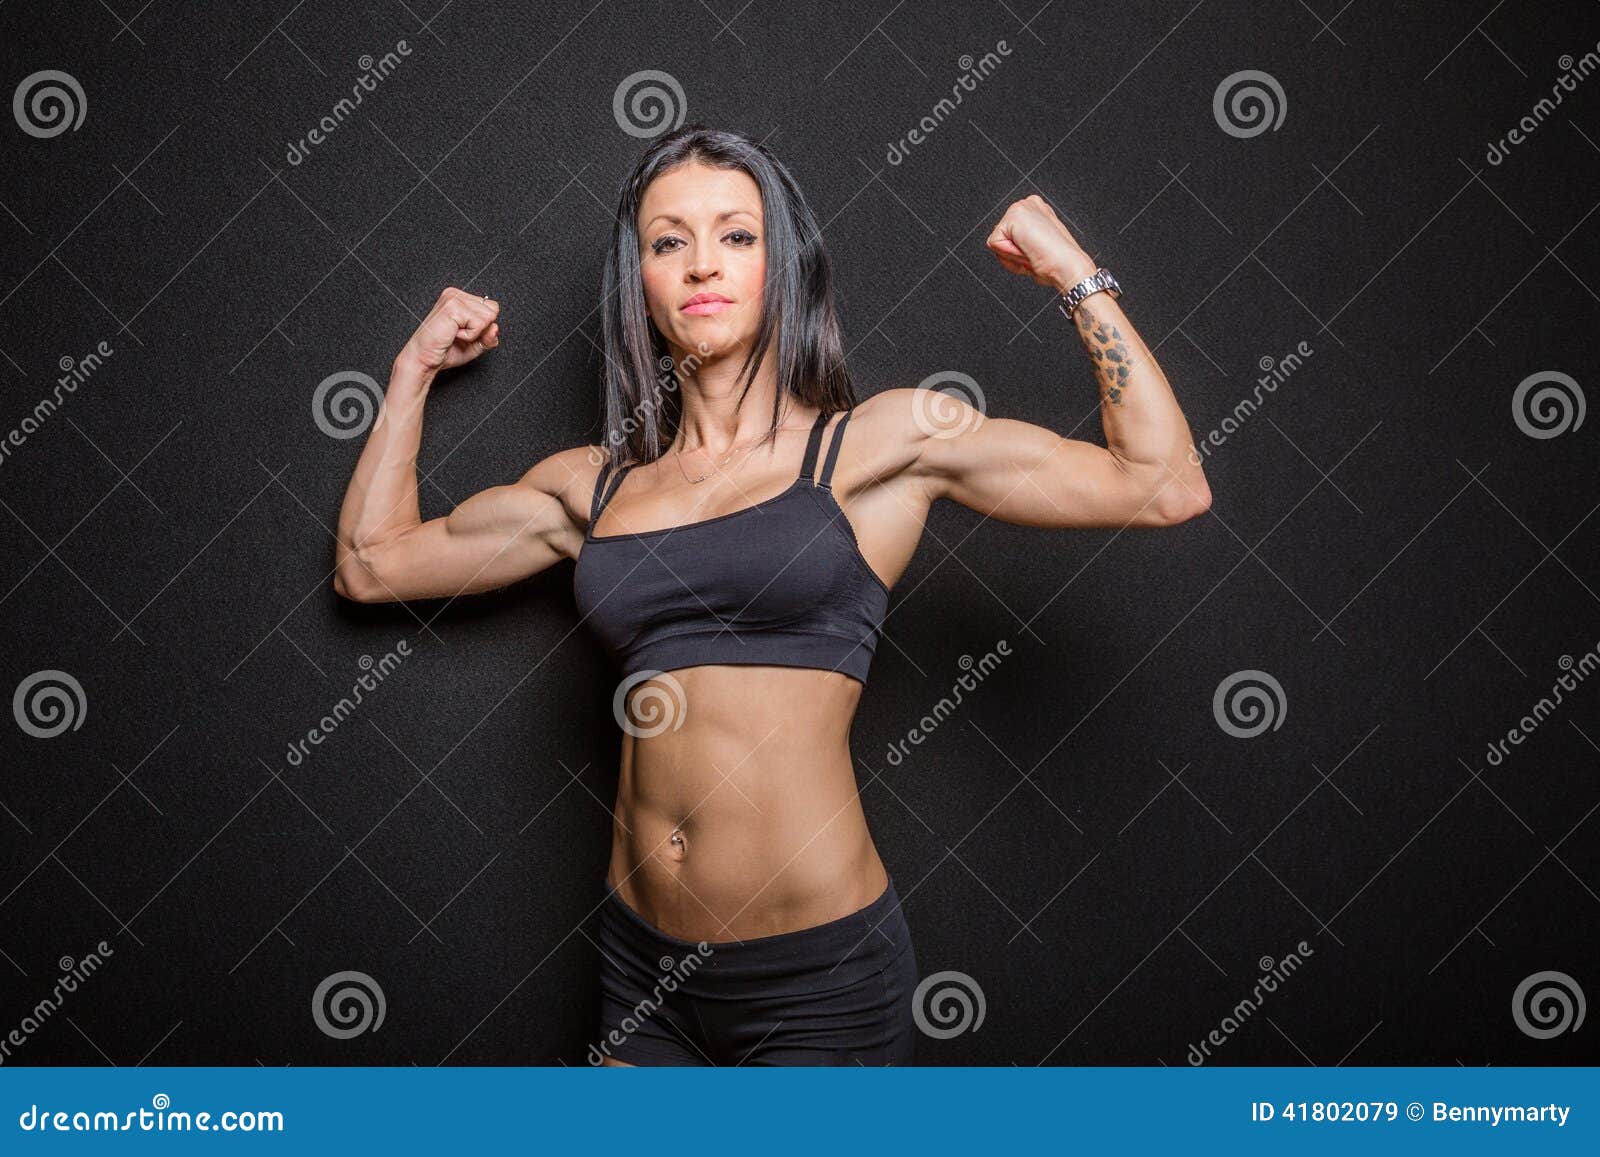 Woman body builder stock image. Image of builder, flexing - 41802079